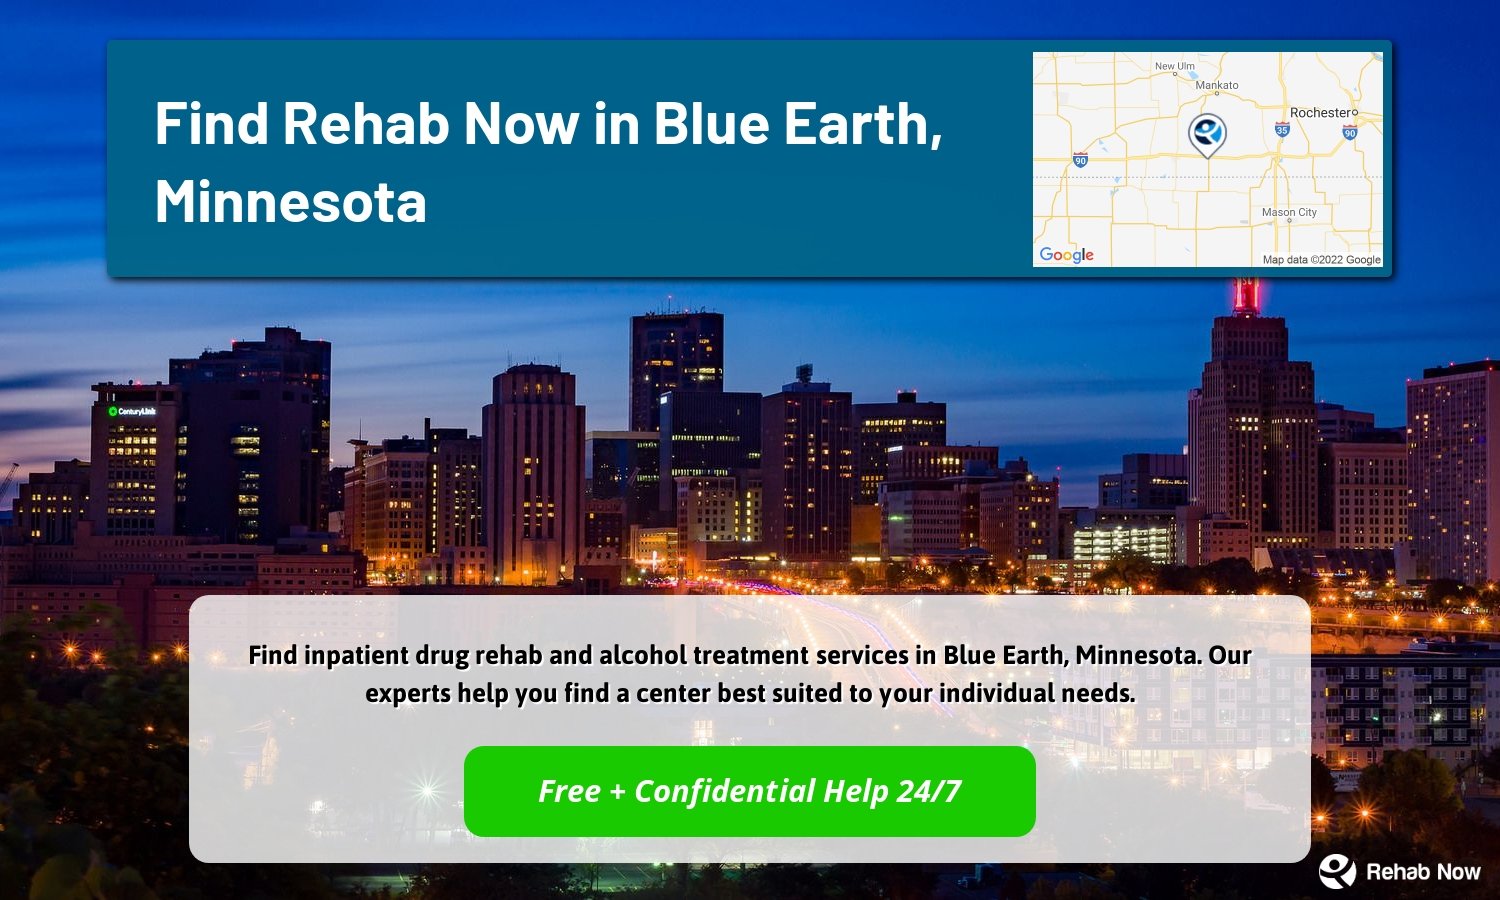 Find inpatient drug rehab and alcohol treatment services in Blue Earth, Minnesota. Our experts help you find a center best suited to your individual needs.